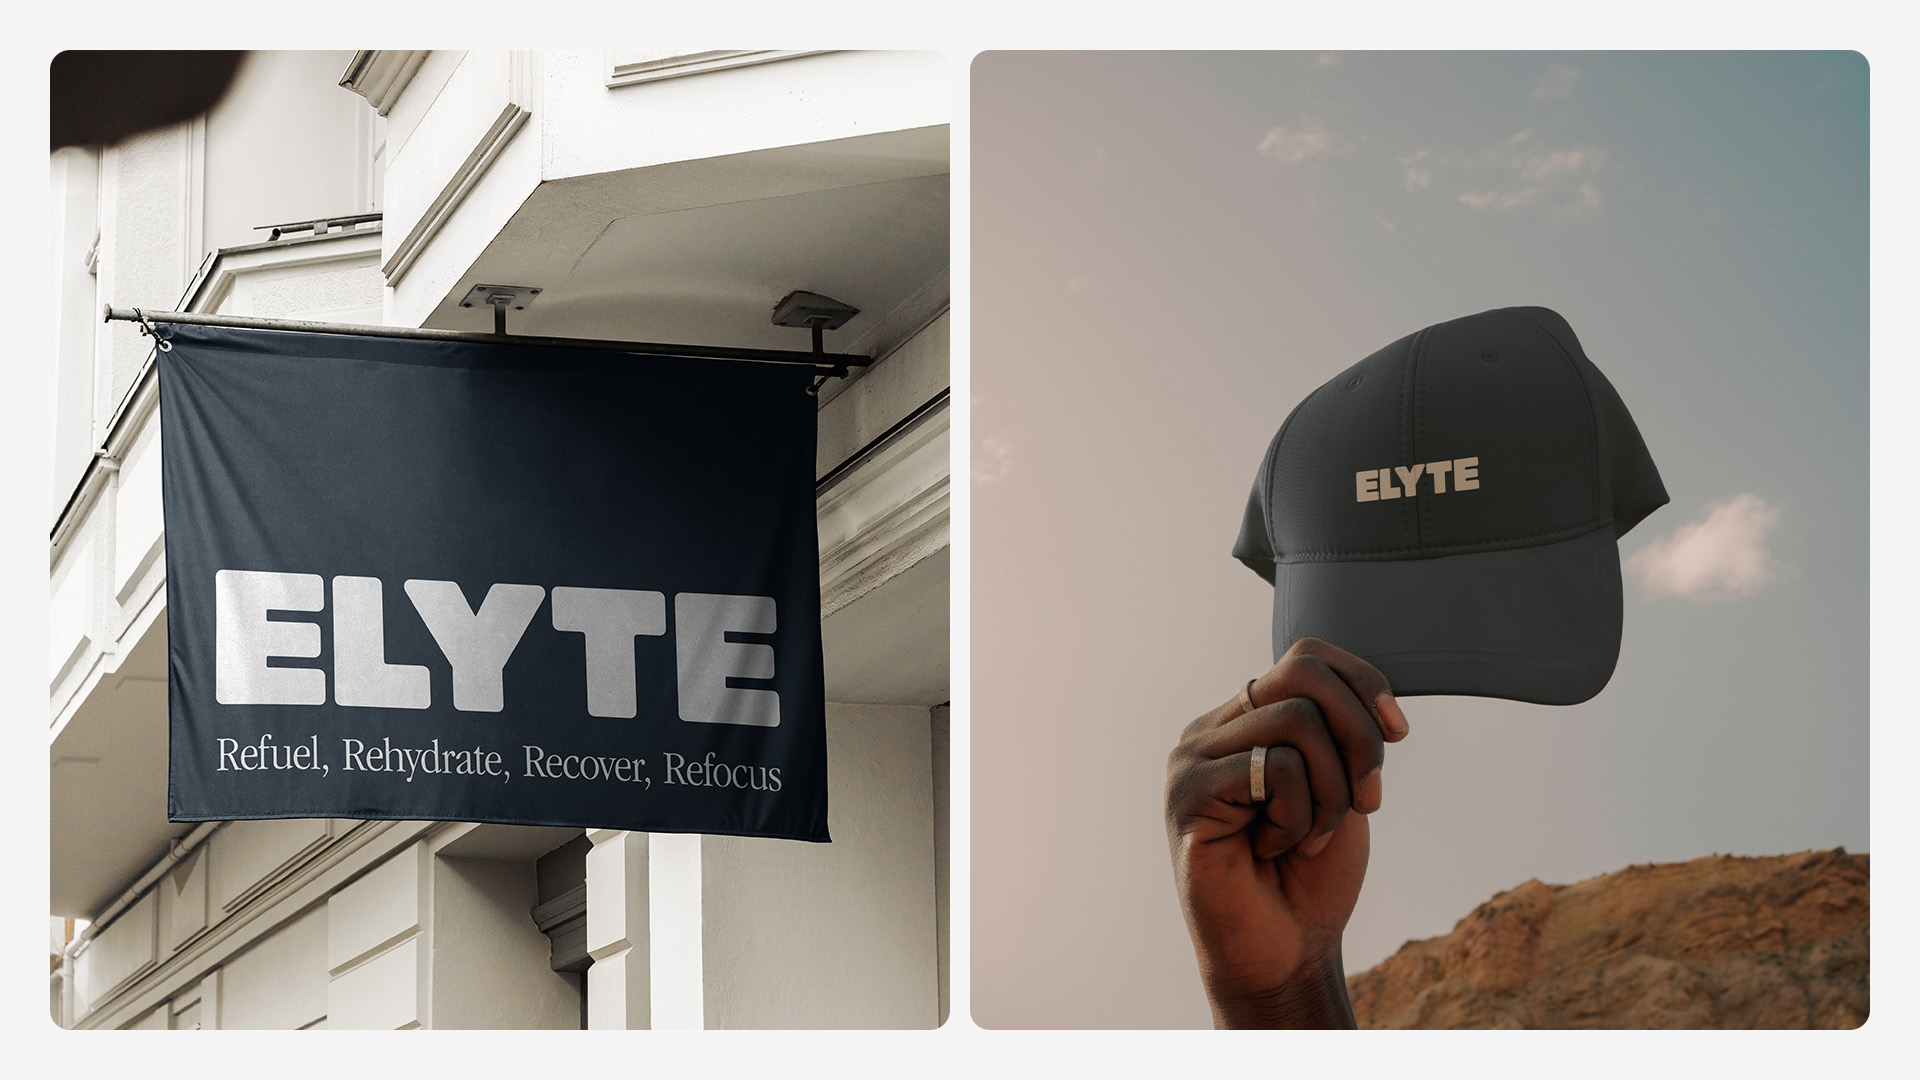 Left image is a flag with the Elyte branding applied. The right image shows an Elyte branded cap.